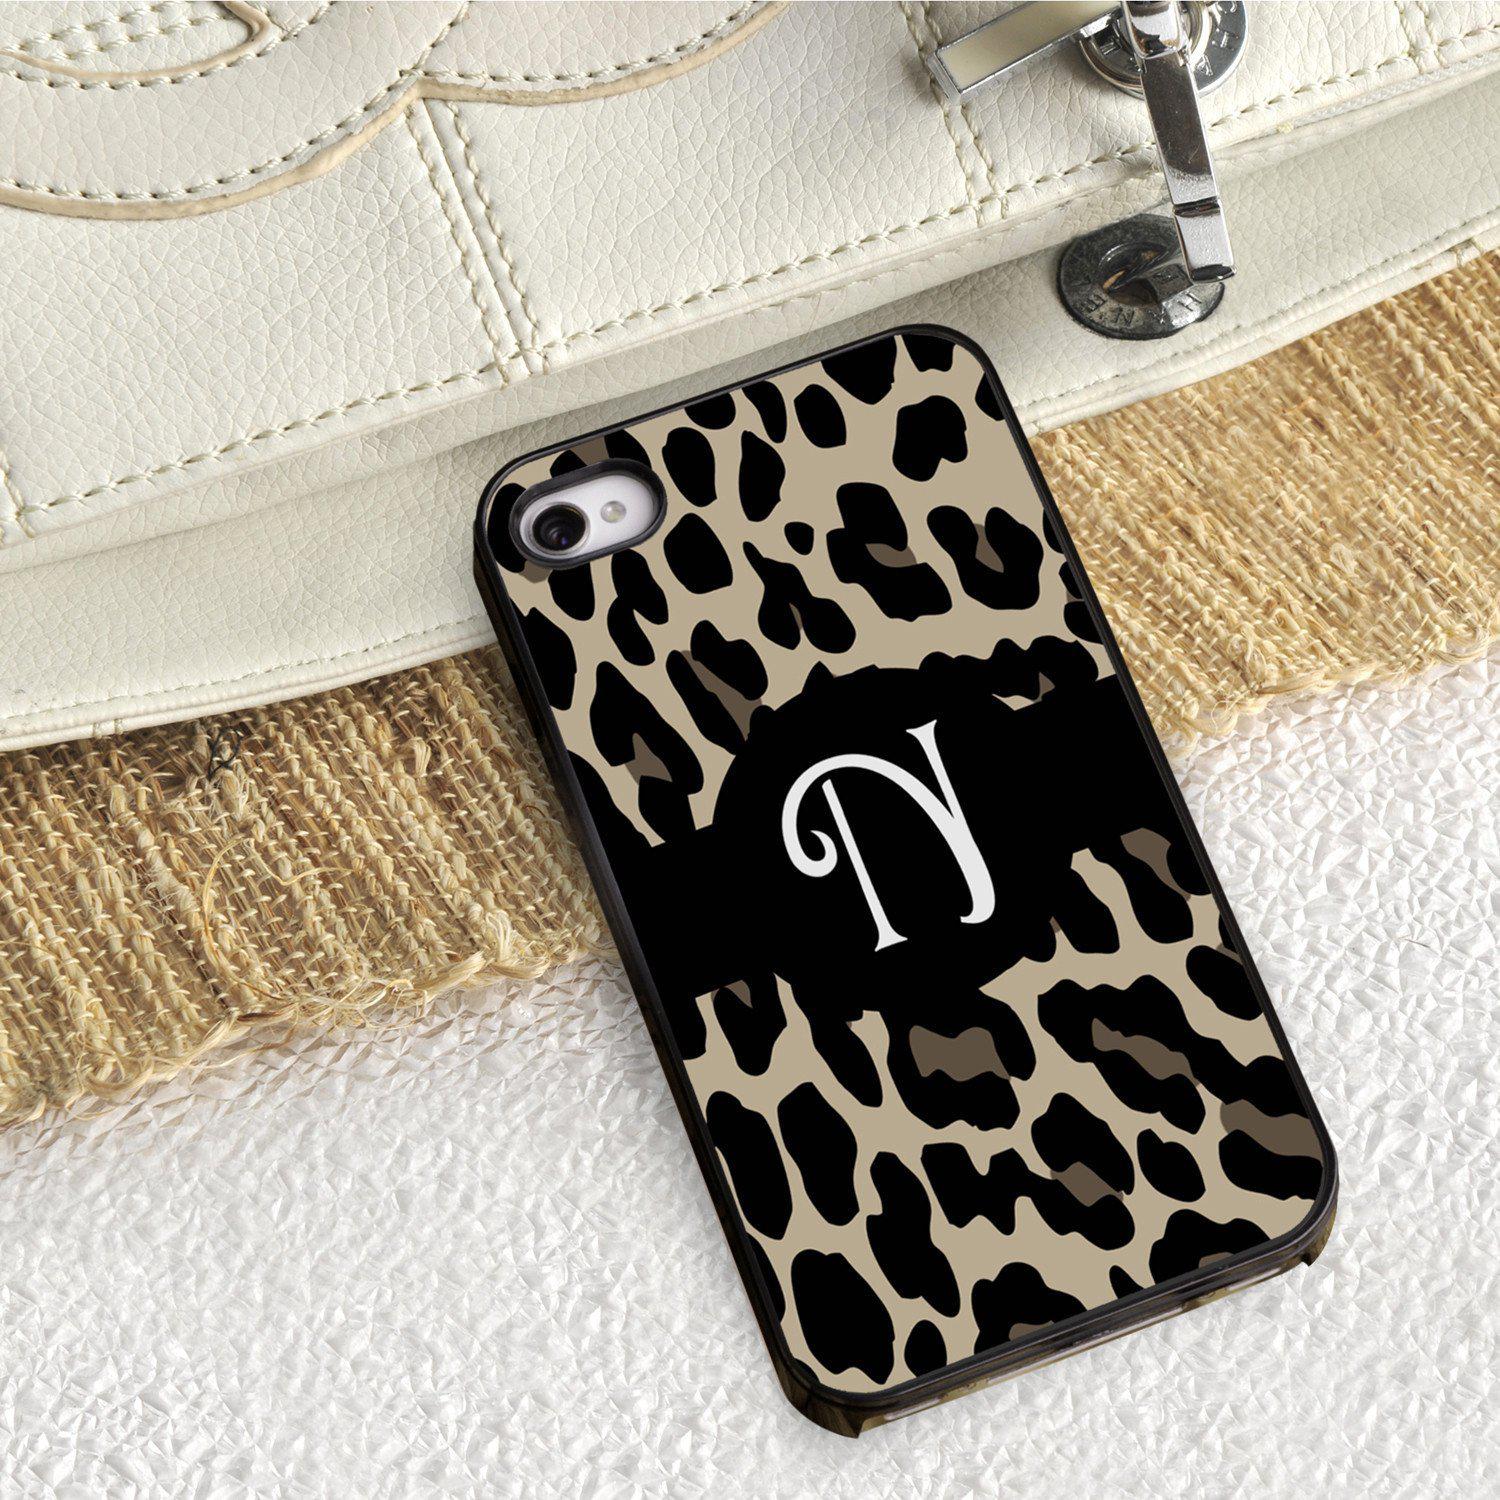 Personalized Black Trimmed iPhone Cover - 1 initial